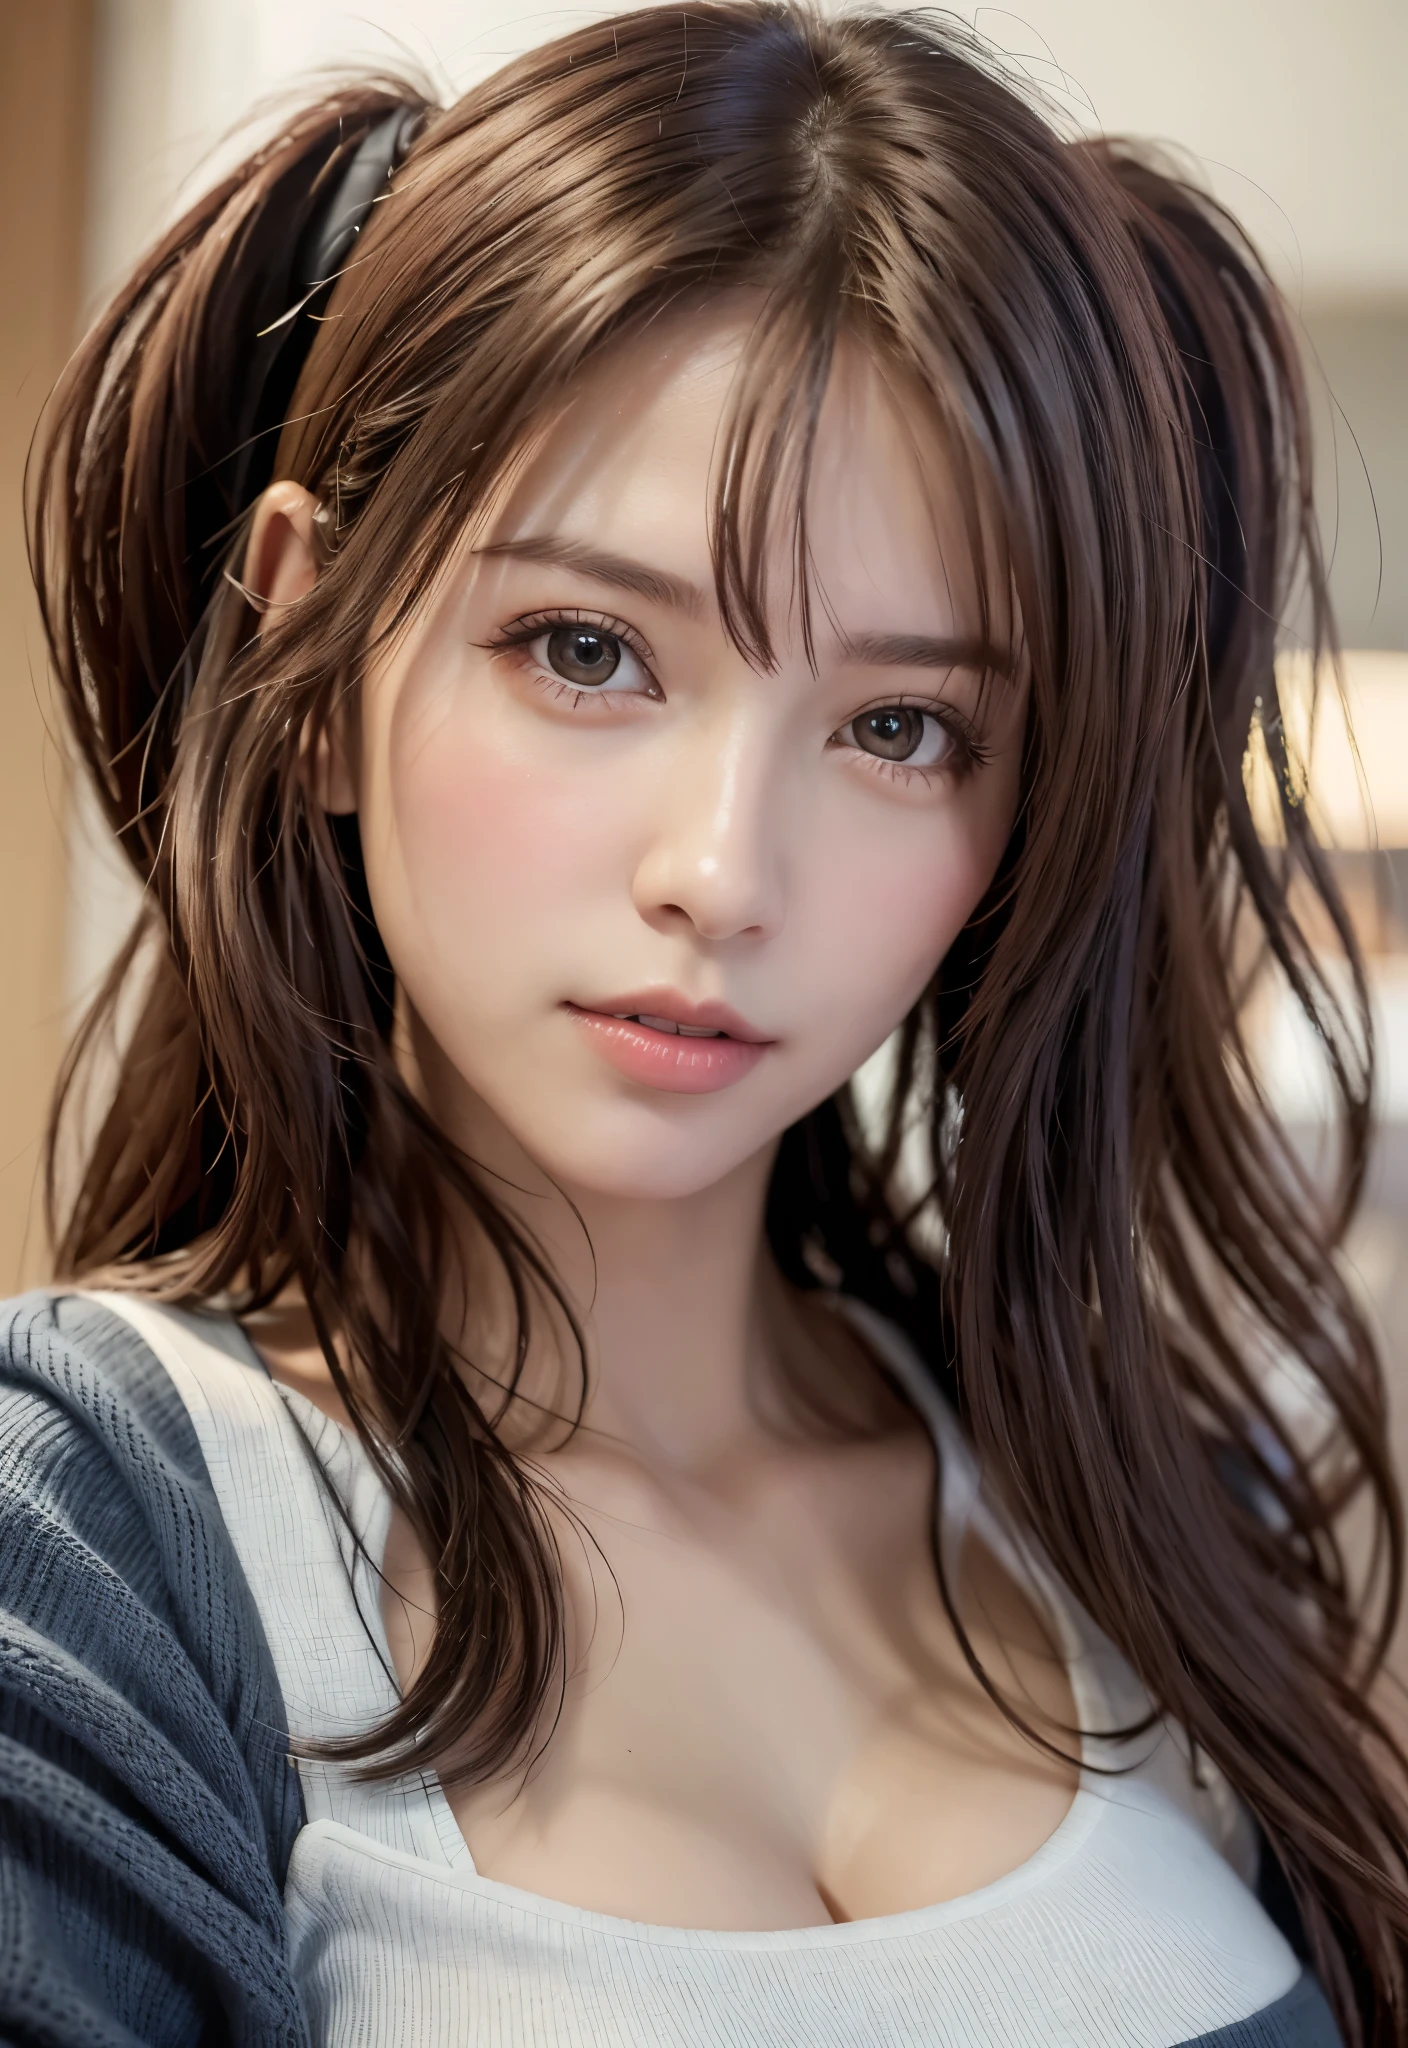 8K, of the highest quality, masutepiece:1.2), (Realistic, Photorealsitic:1.37), of the highest quality, masutepiece, Beautiful young woman, Pensive expression,、A charming、and an inviting look, Oversized knitwear、cleavage of the breast, Hair tied back, Cinematic background, Light skin tone